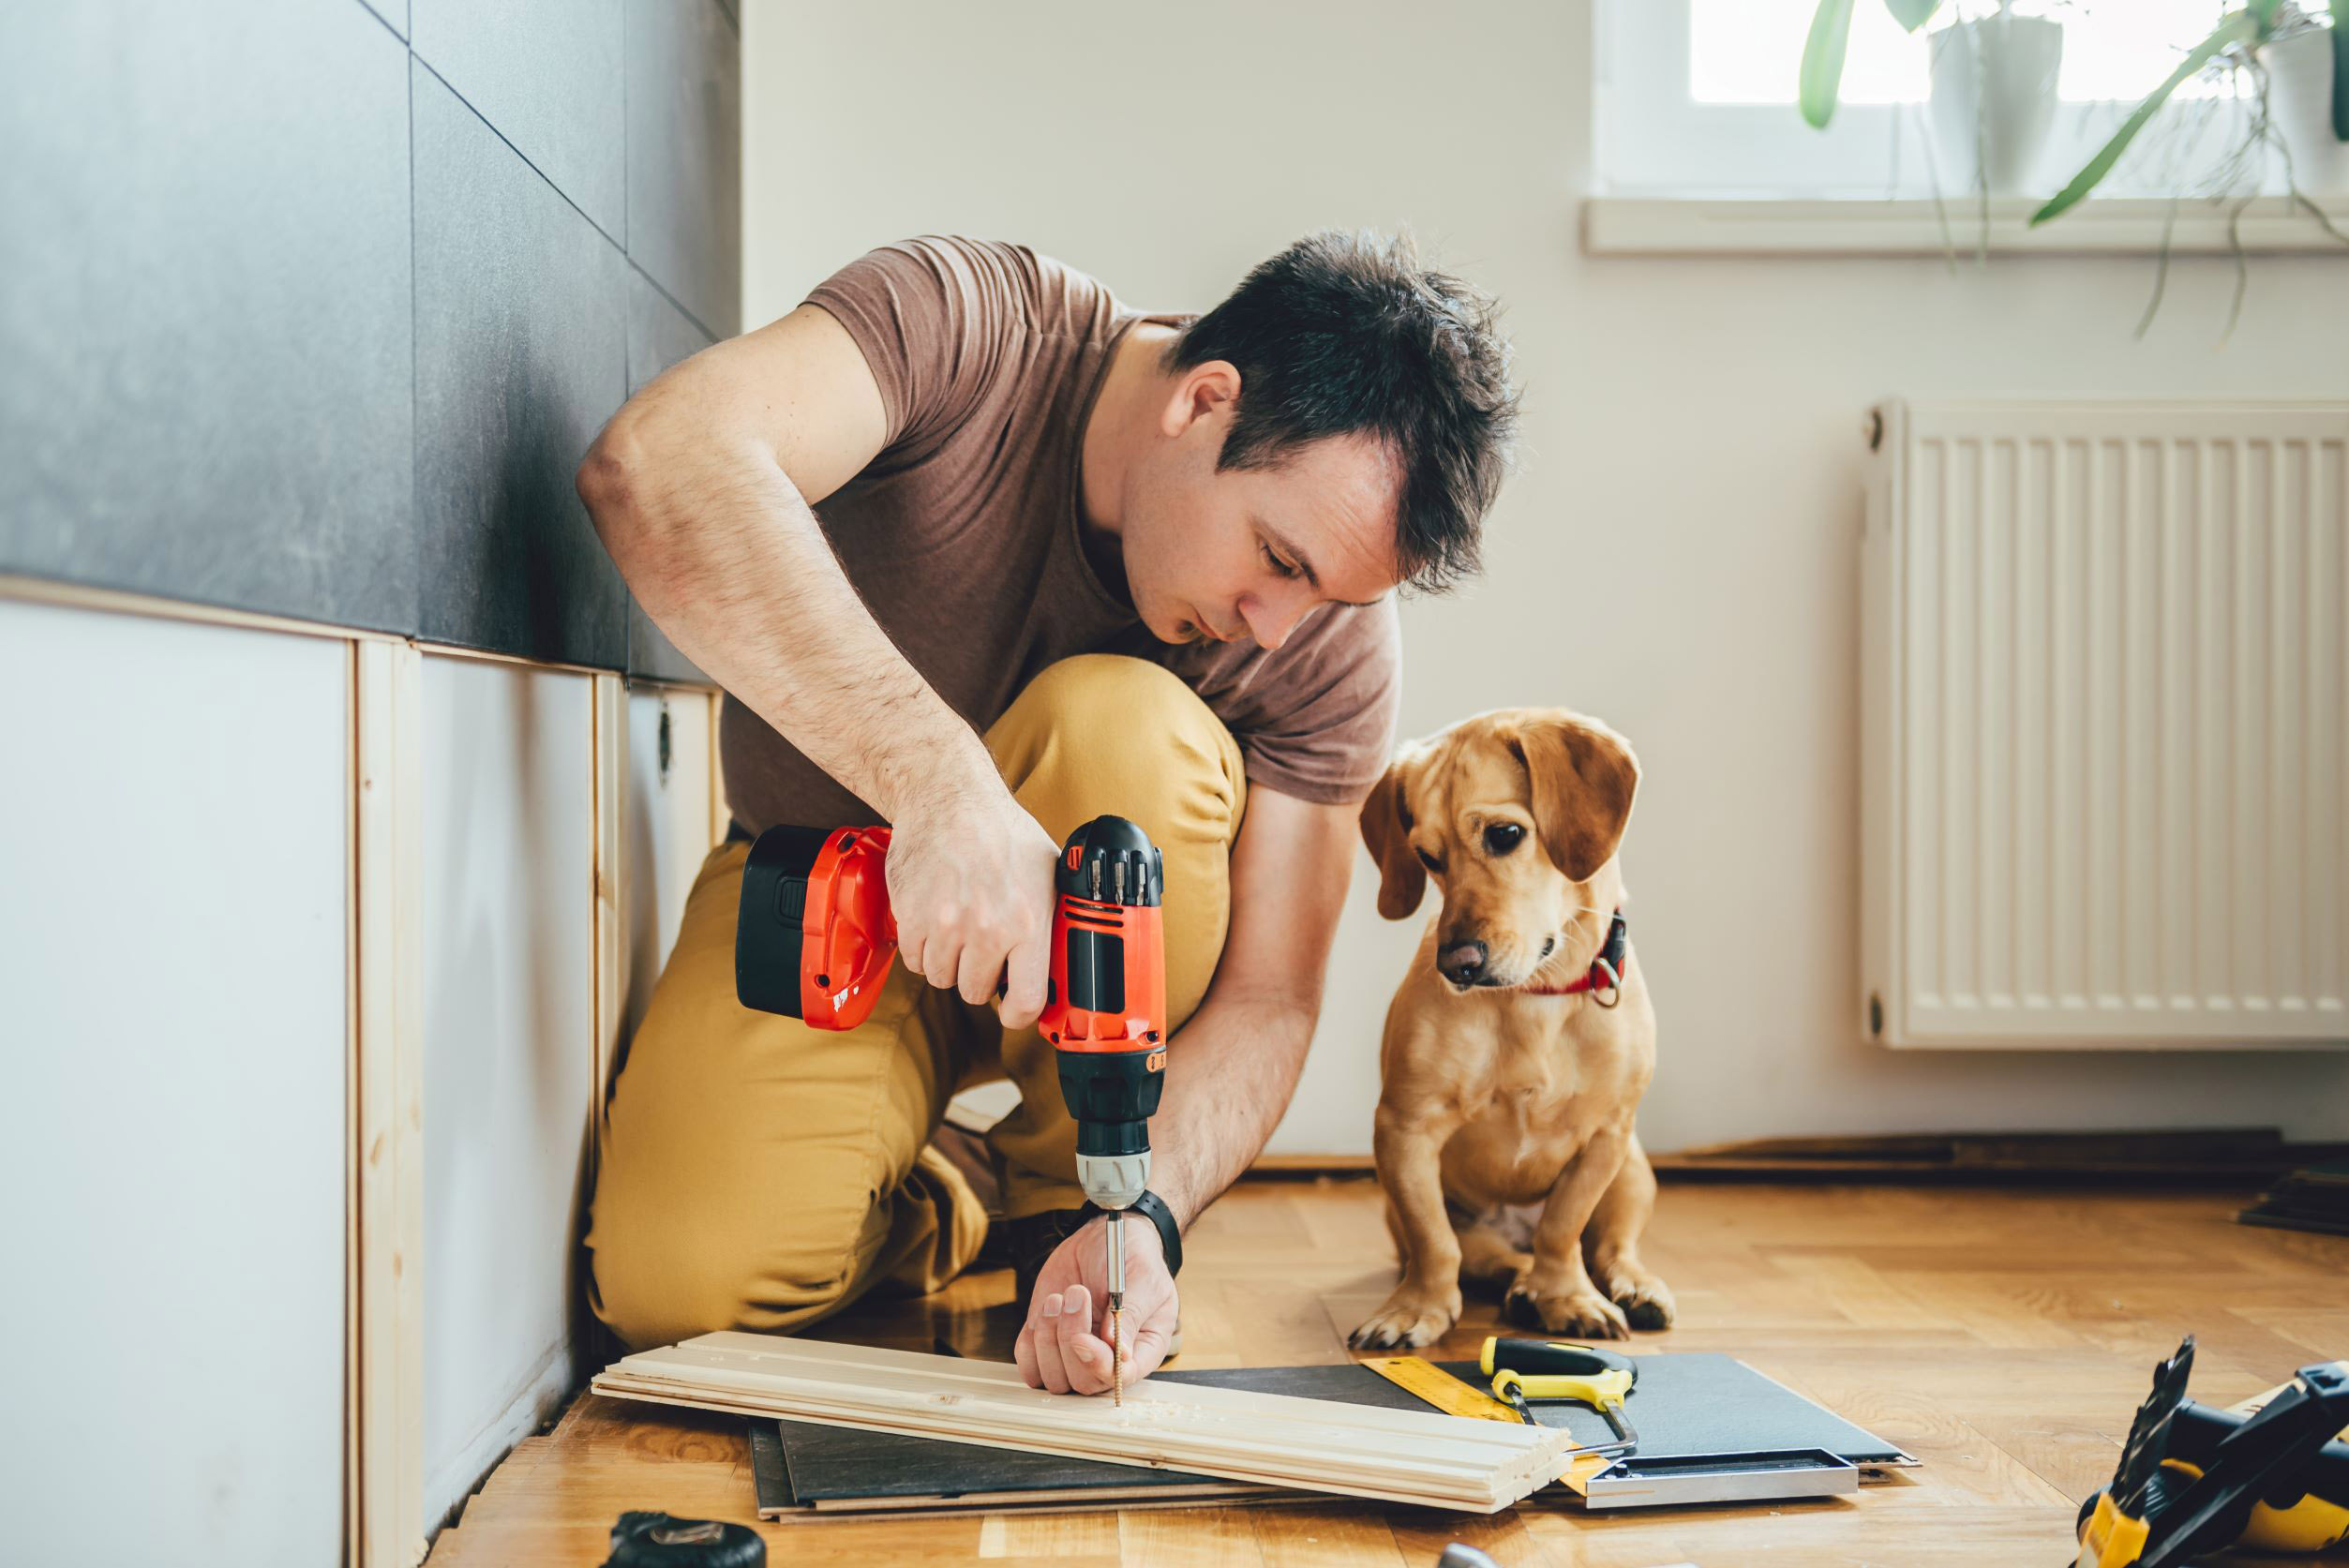 Man with dog - click for home equity line of credit